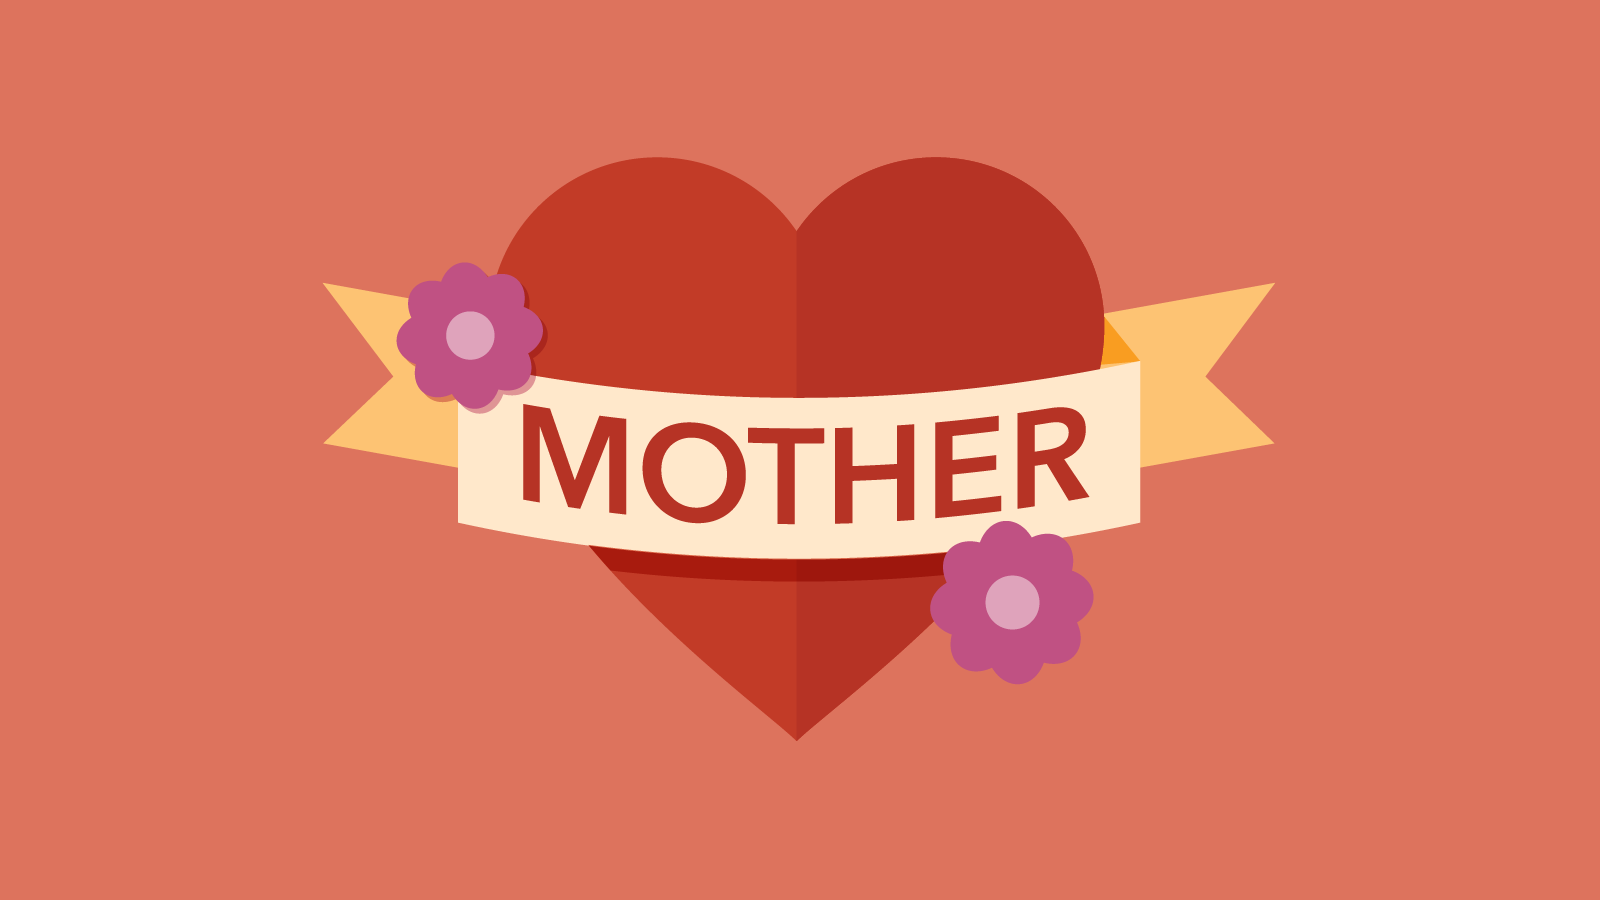 Graphic of a heart with "Mother" written on it